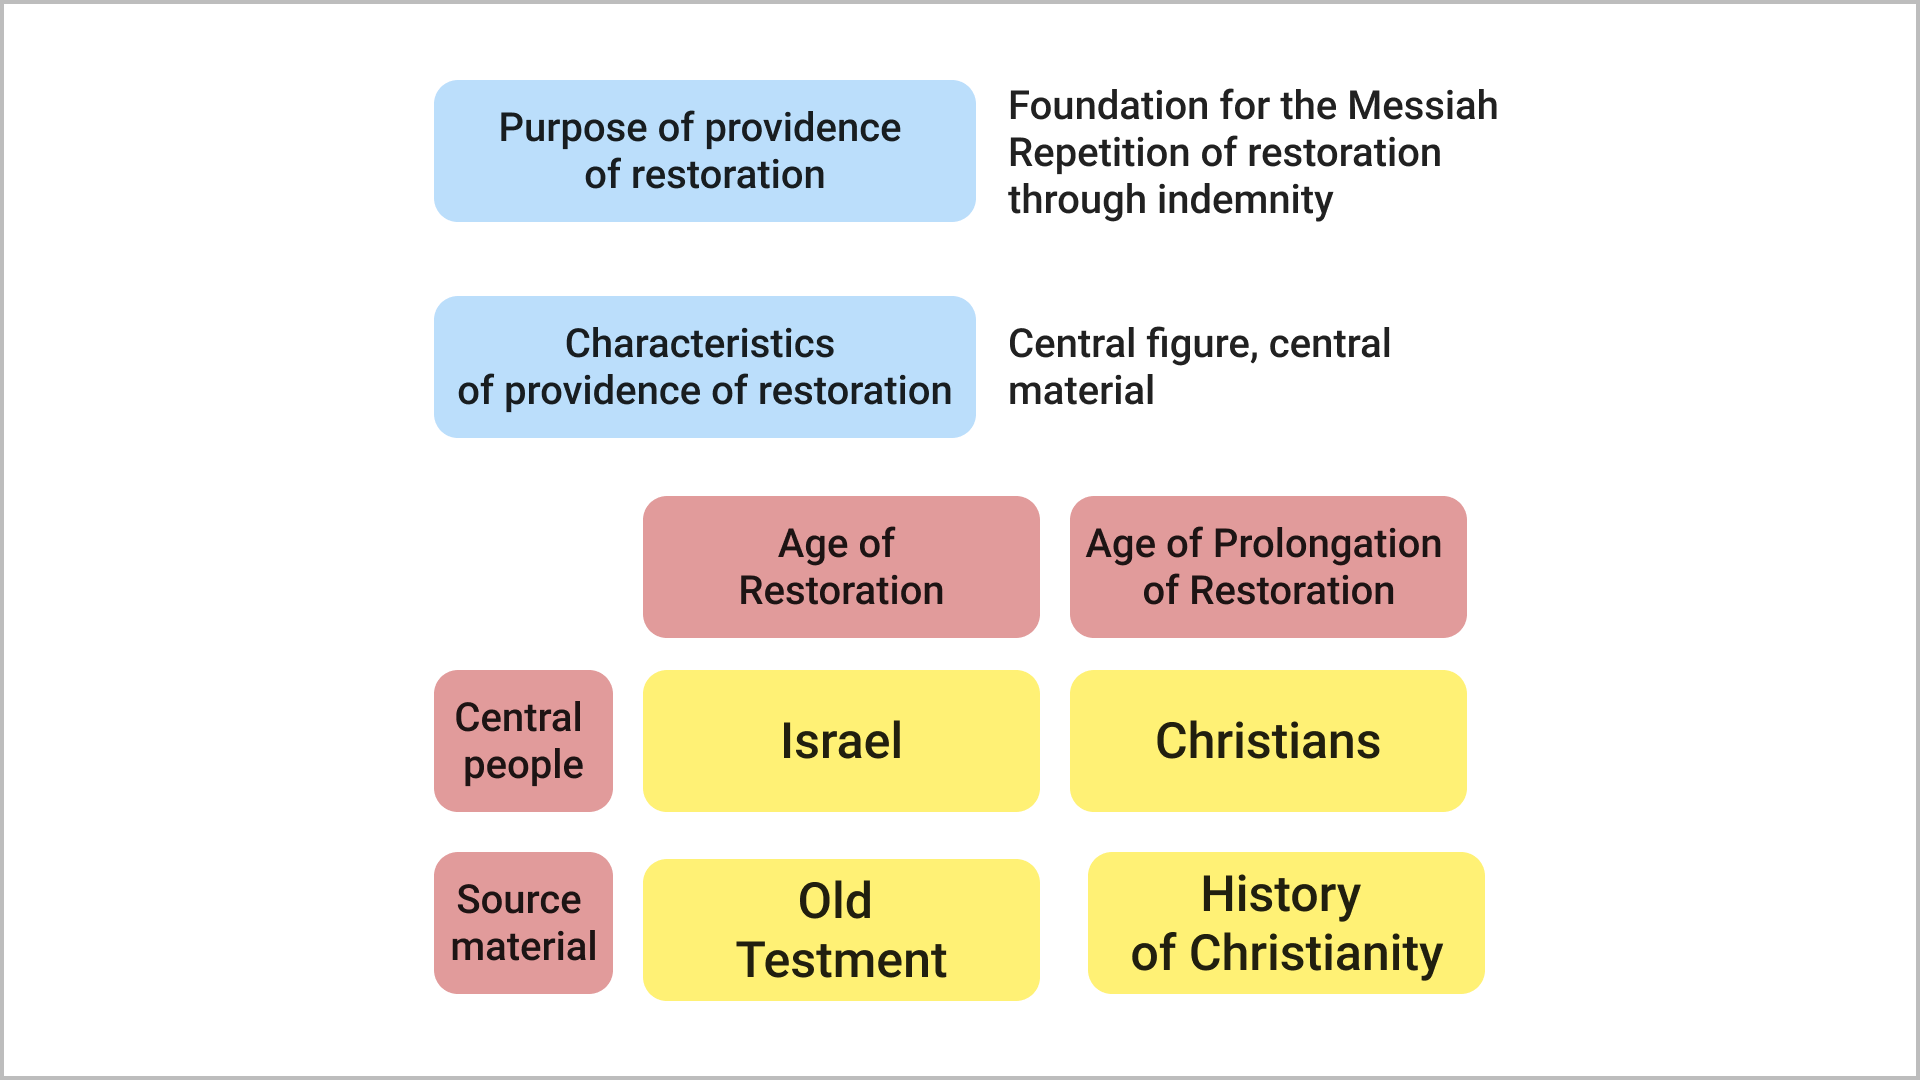 The Parallels between the Two Ages in the Providence of Restoration